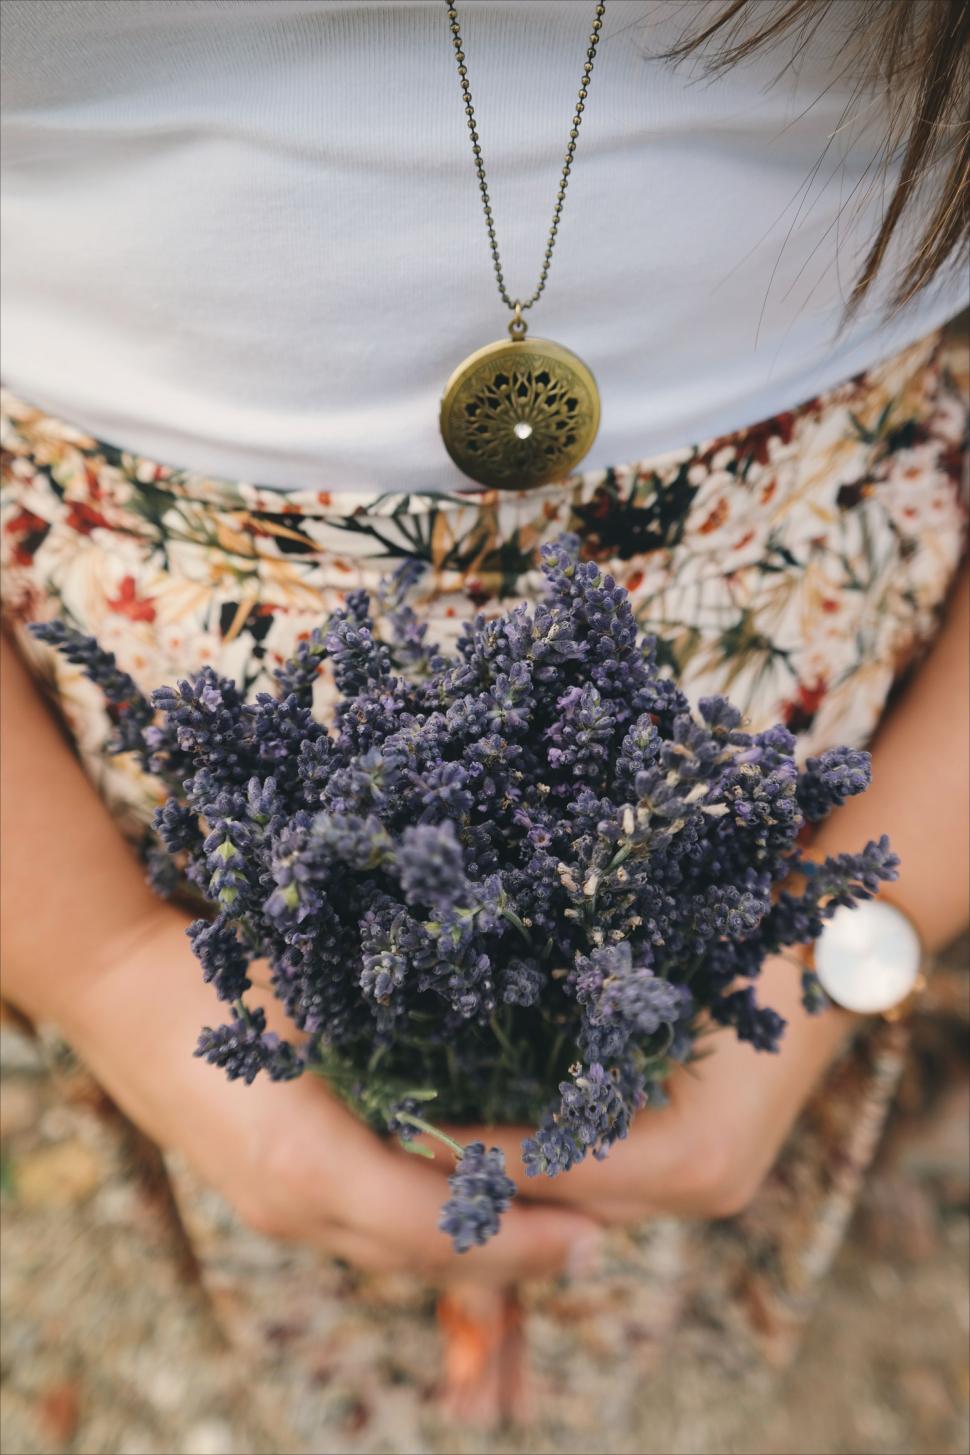 Free Image of Lavender Flower bouquet in hand 